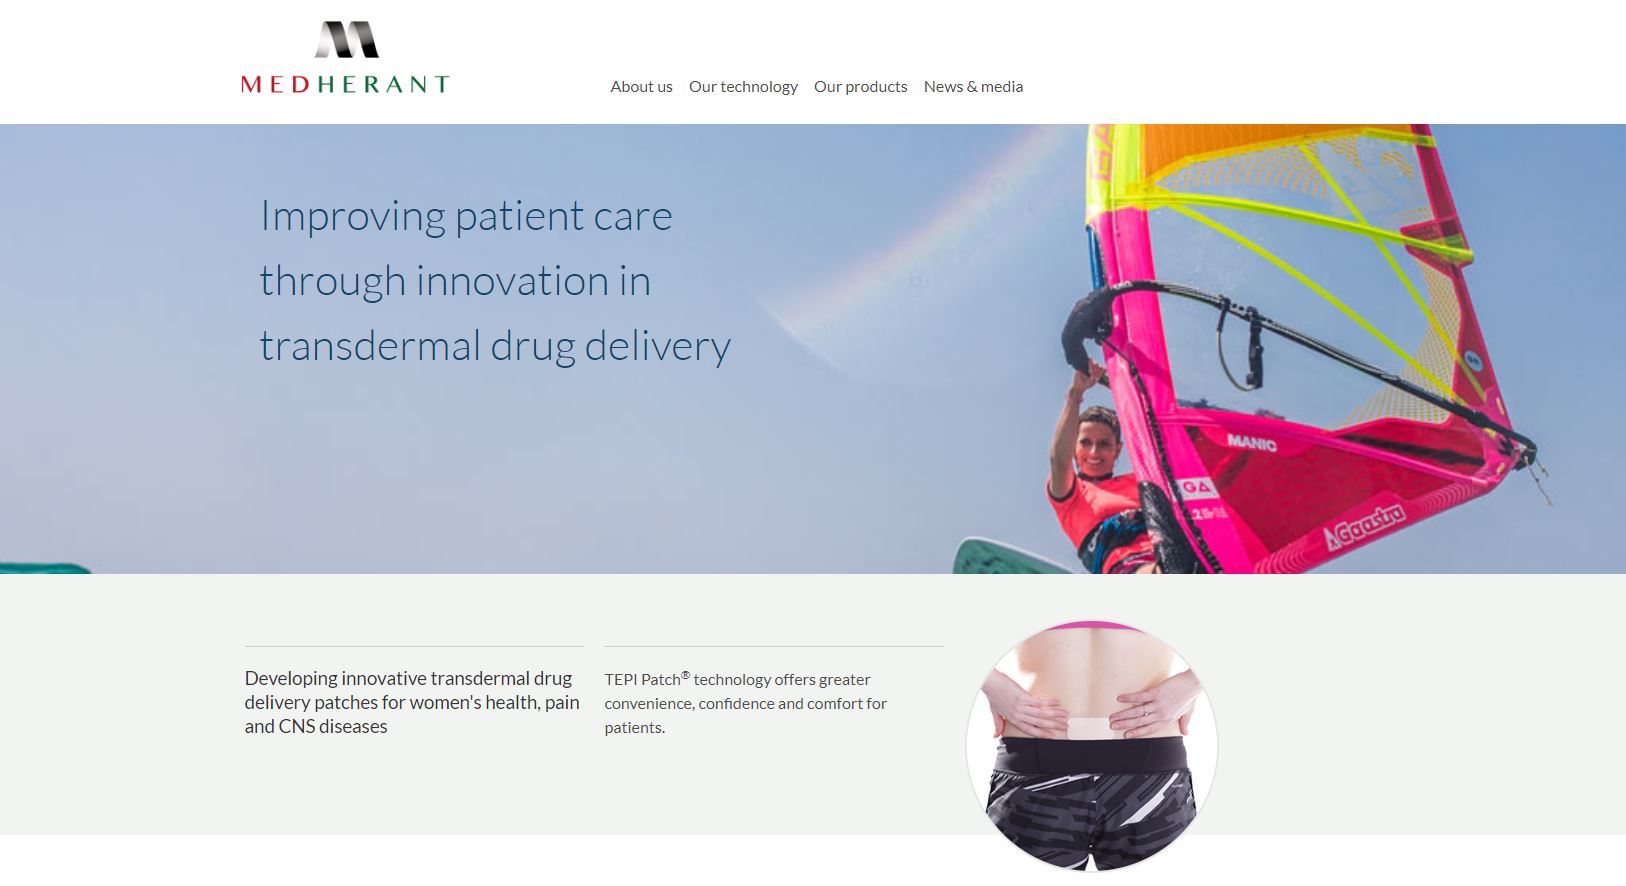 Medherant has recently raised $3.7M and is developing innovative treatments